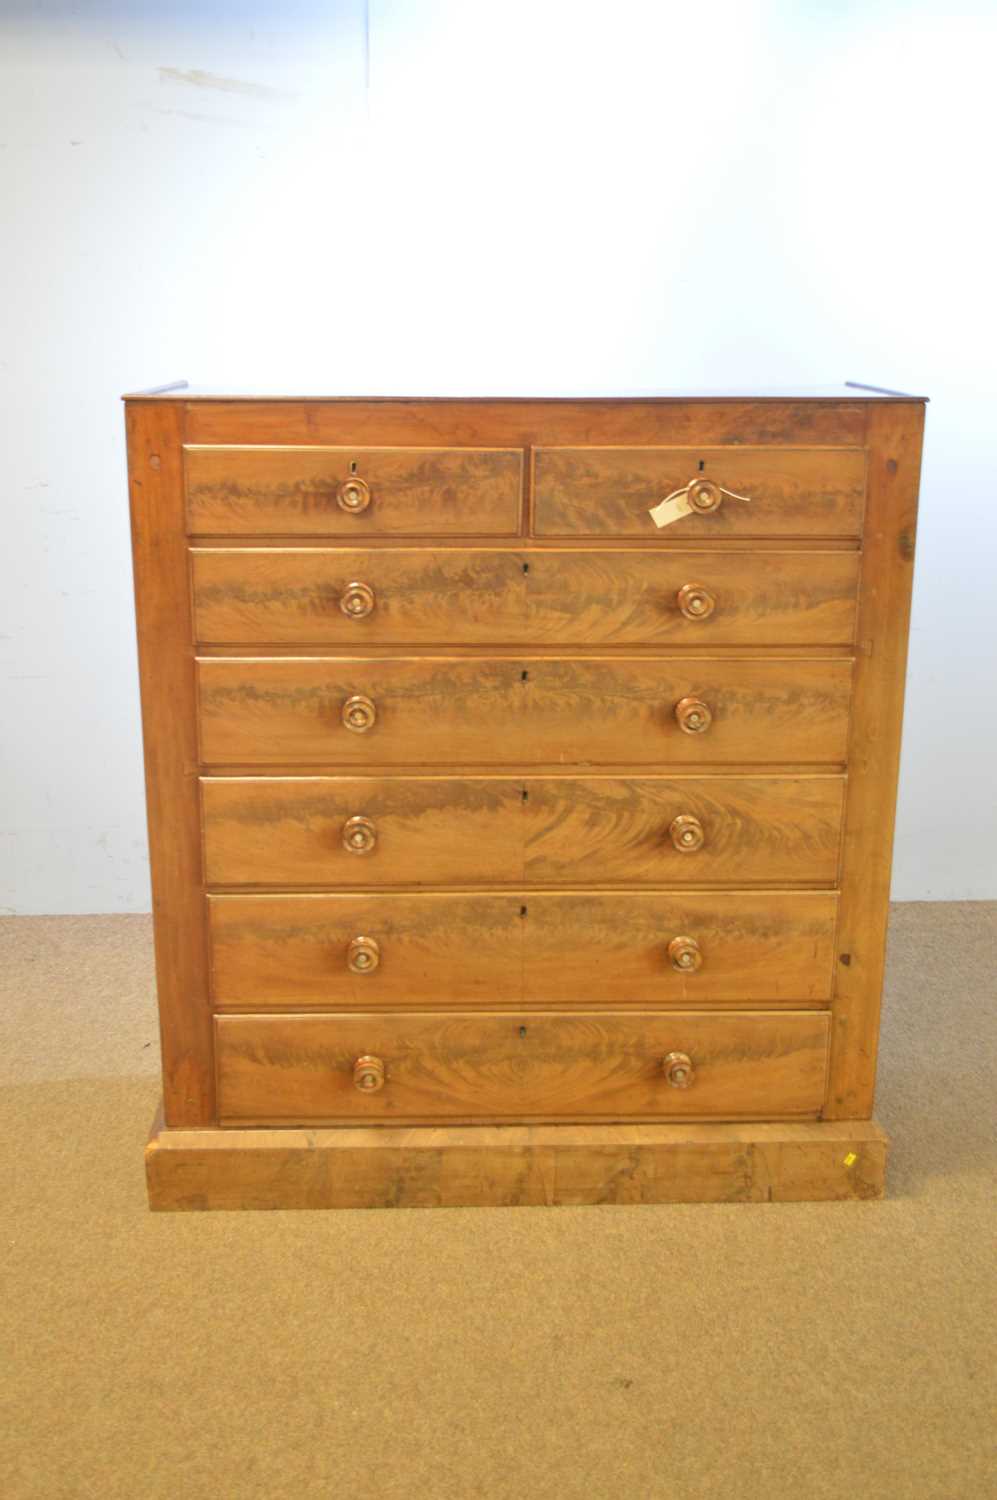 Lot 4 - Early 19th C mahogany chest of drawers.